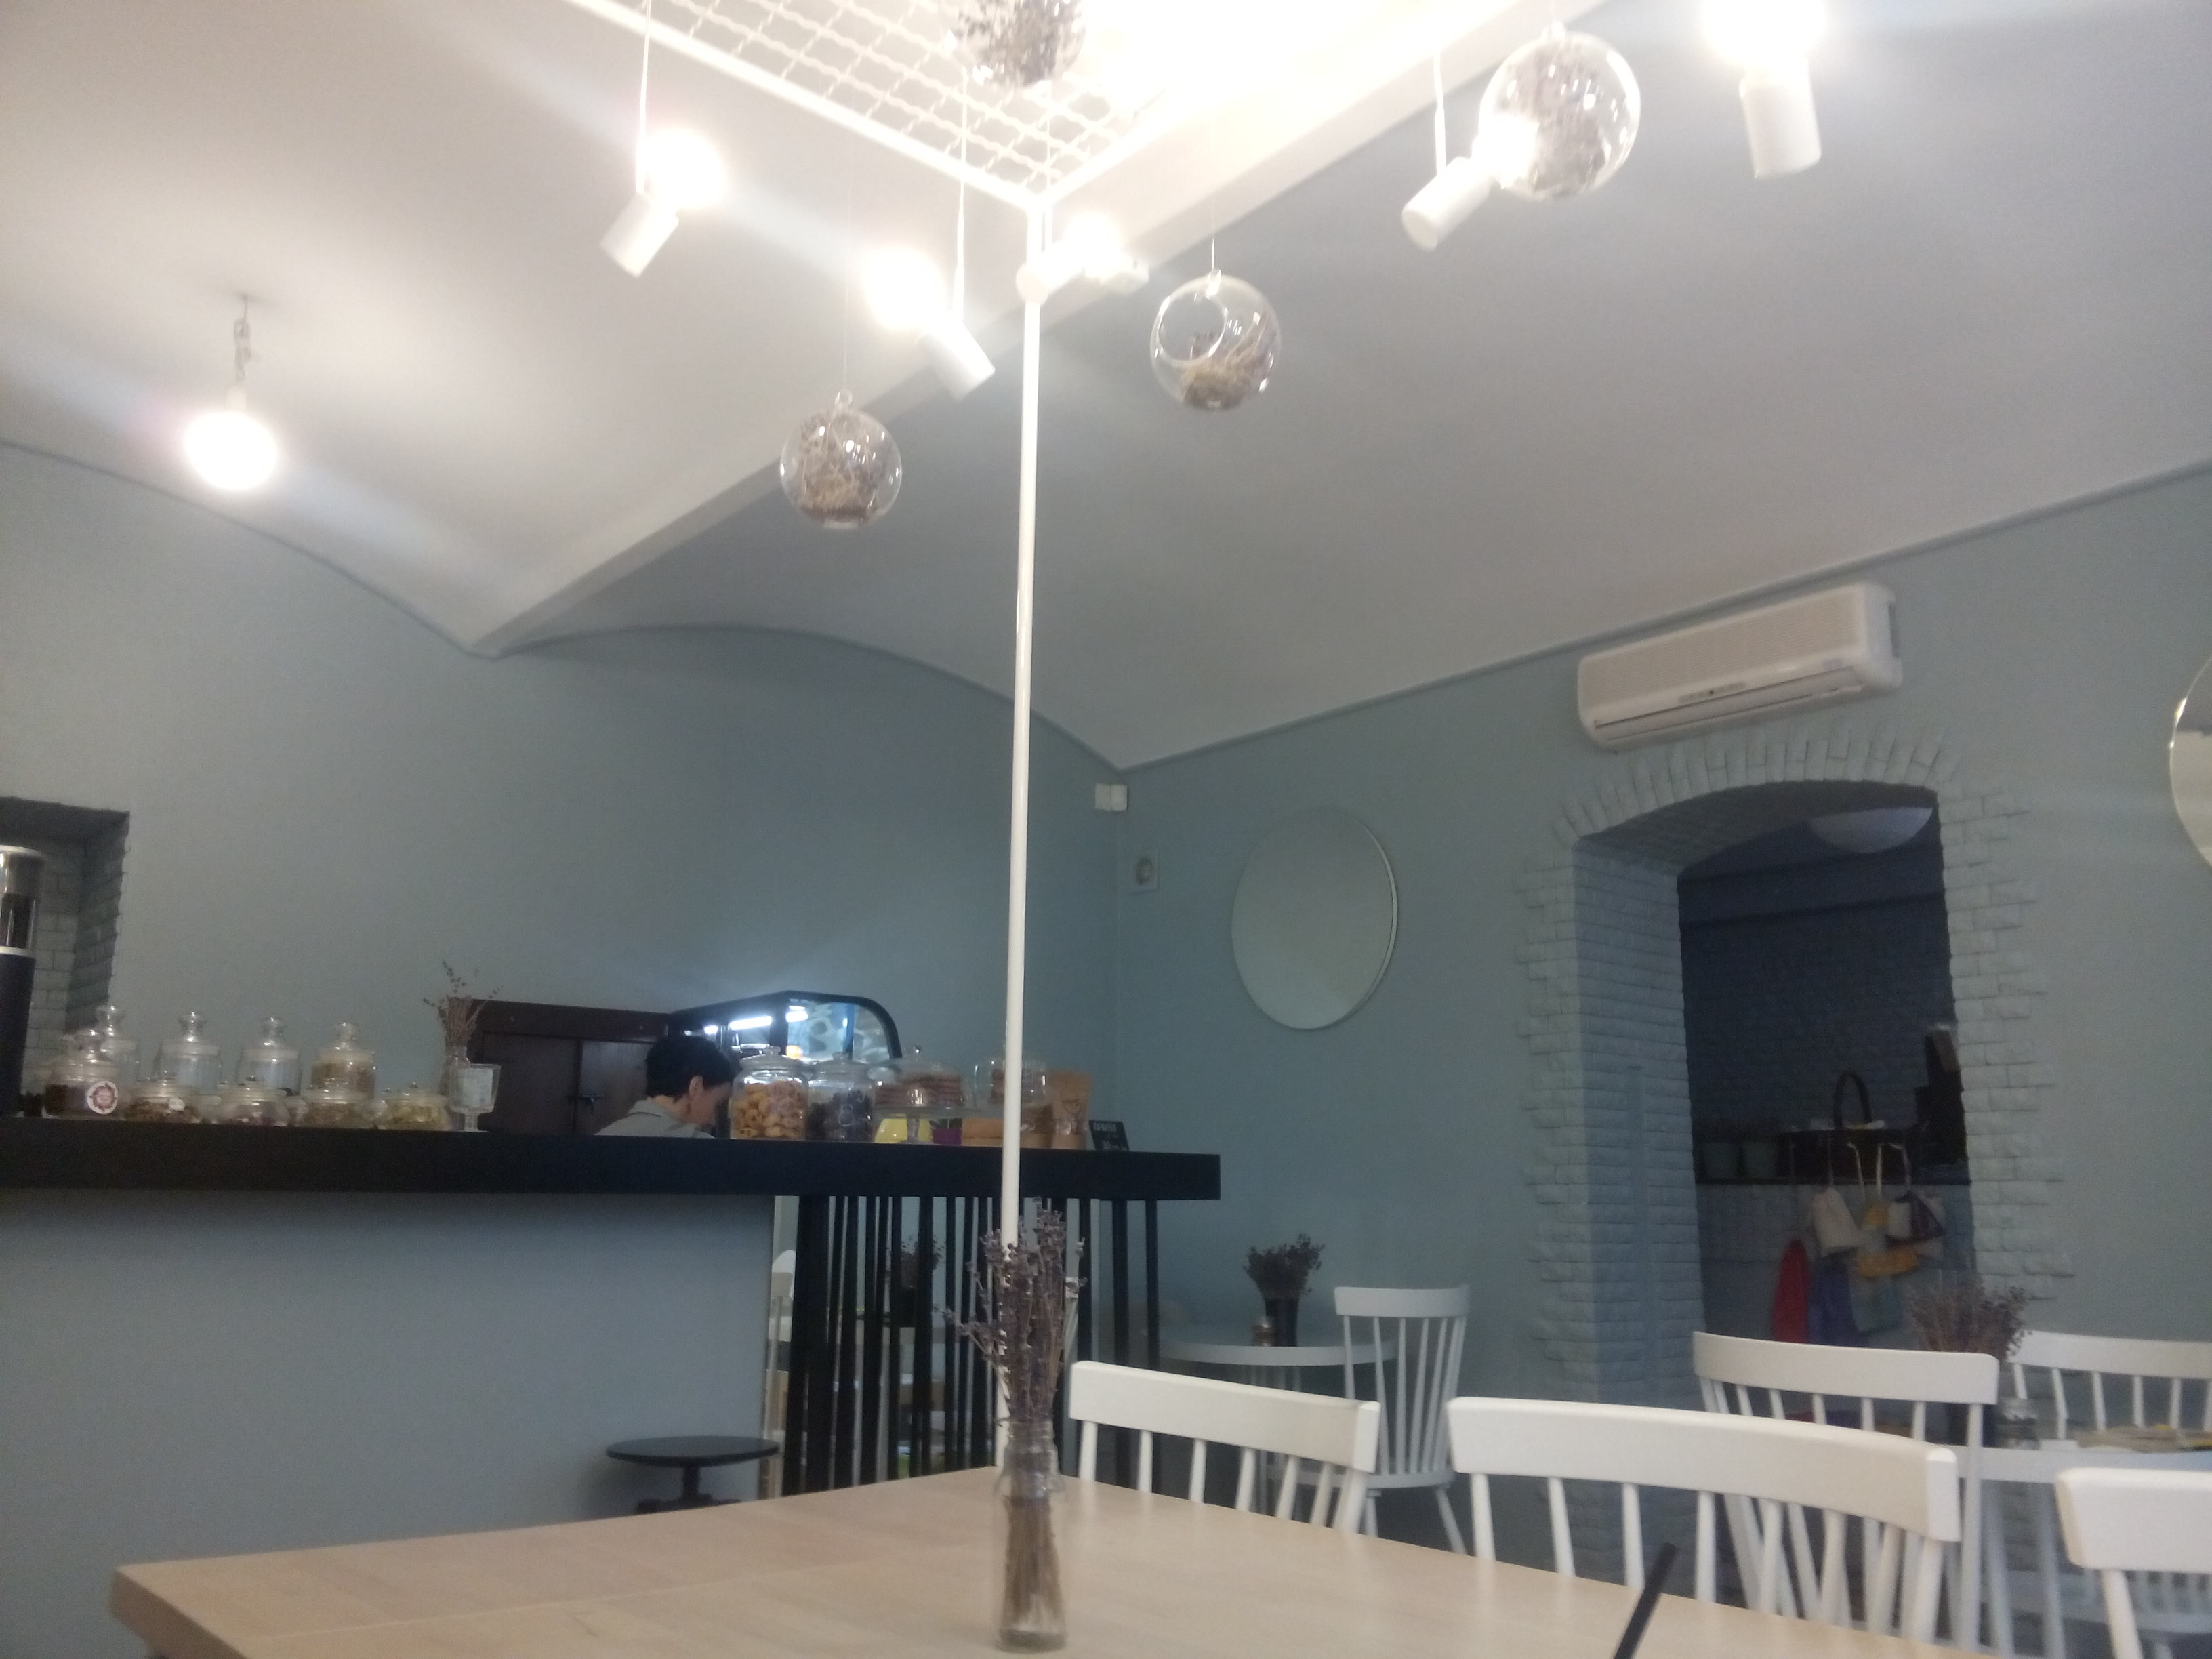 Inside a cafe painted blue with wooden tables, white seats and a counter with jars on